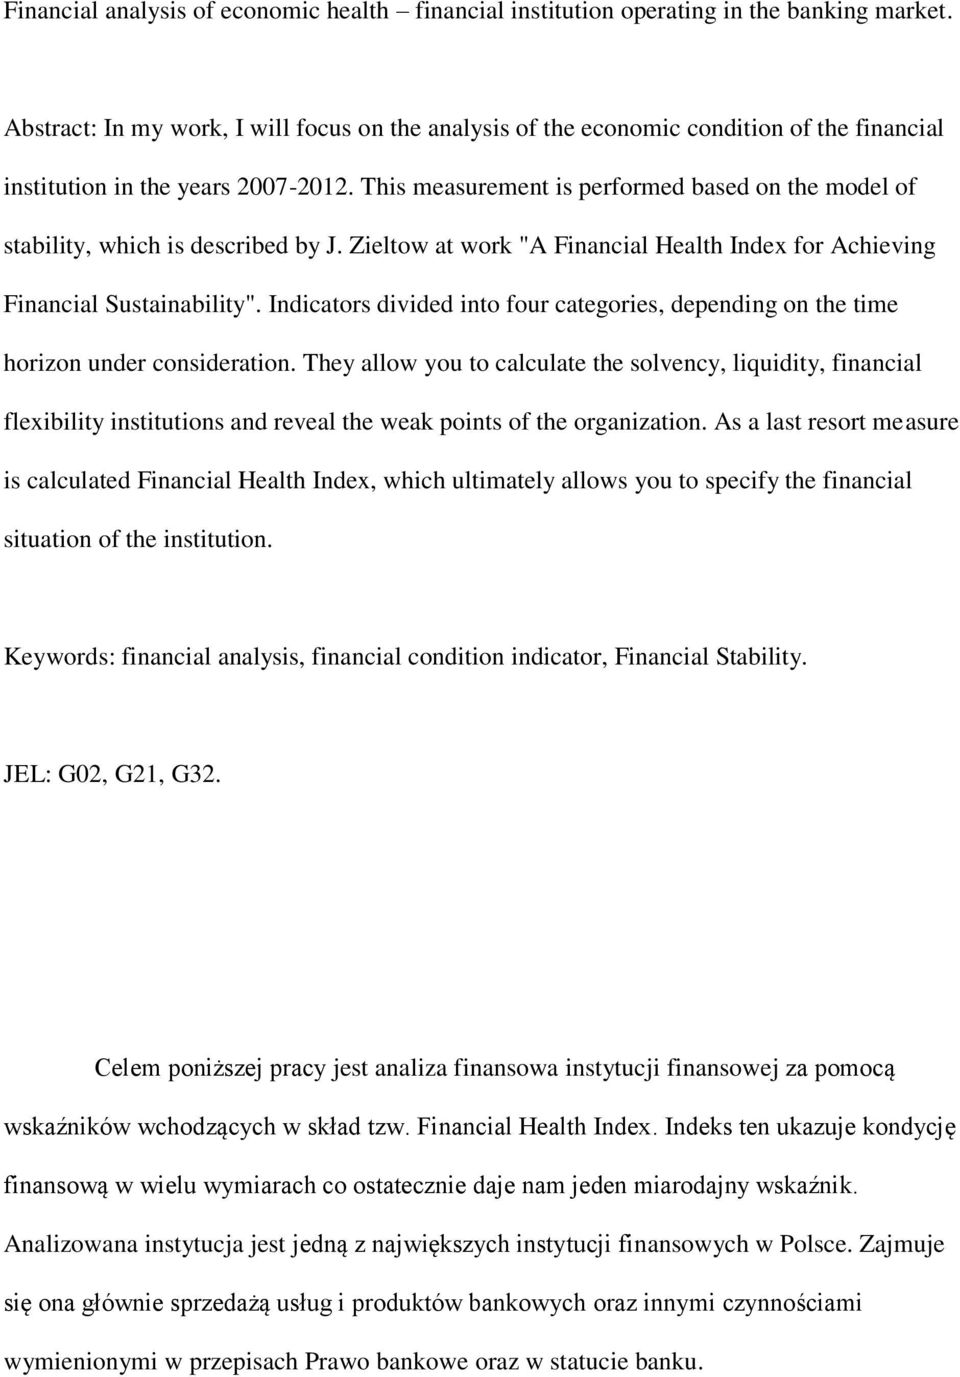 This measurement is performed based on the model of stability, which is described by J. Zieltow at work "A Financial Health Index for Achieving Financial Sustainability".